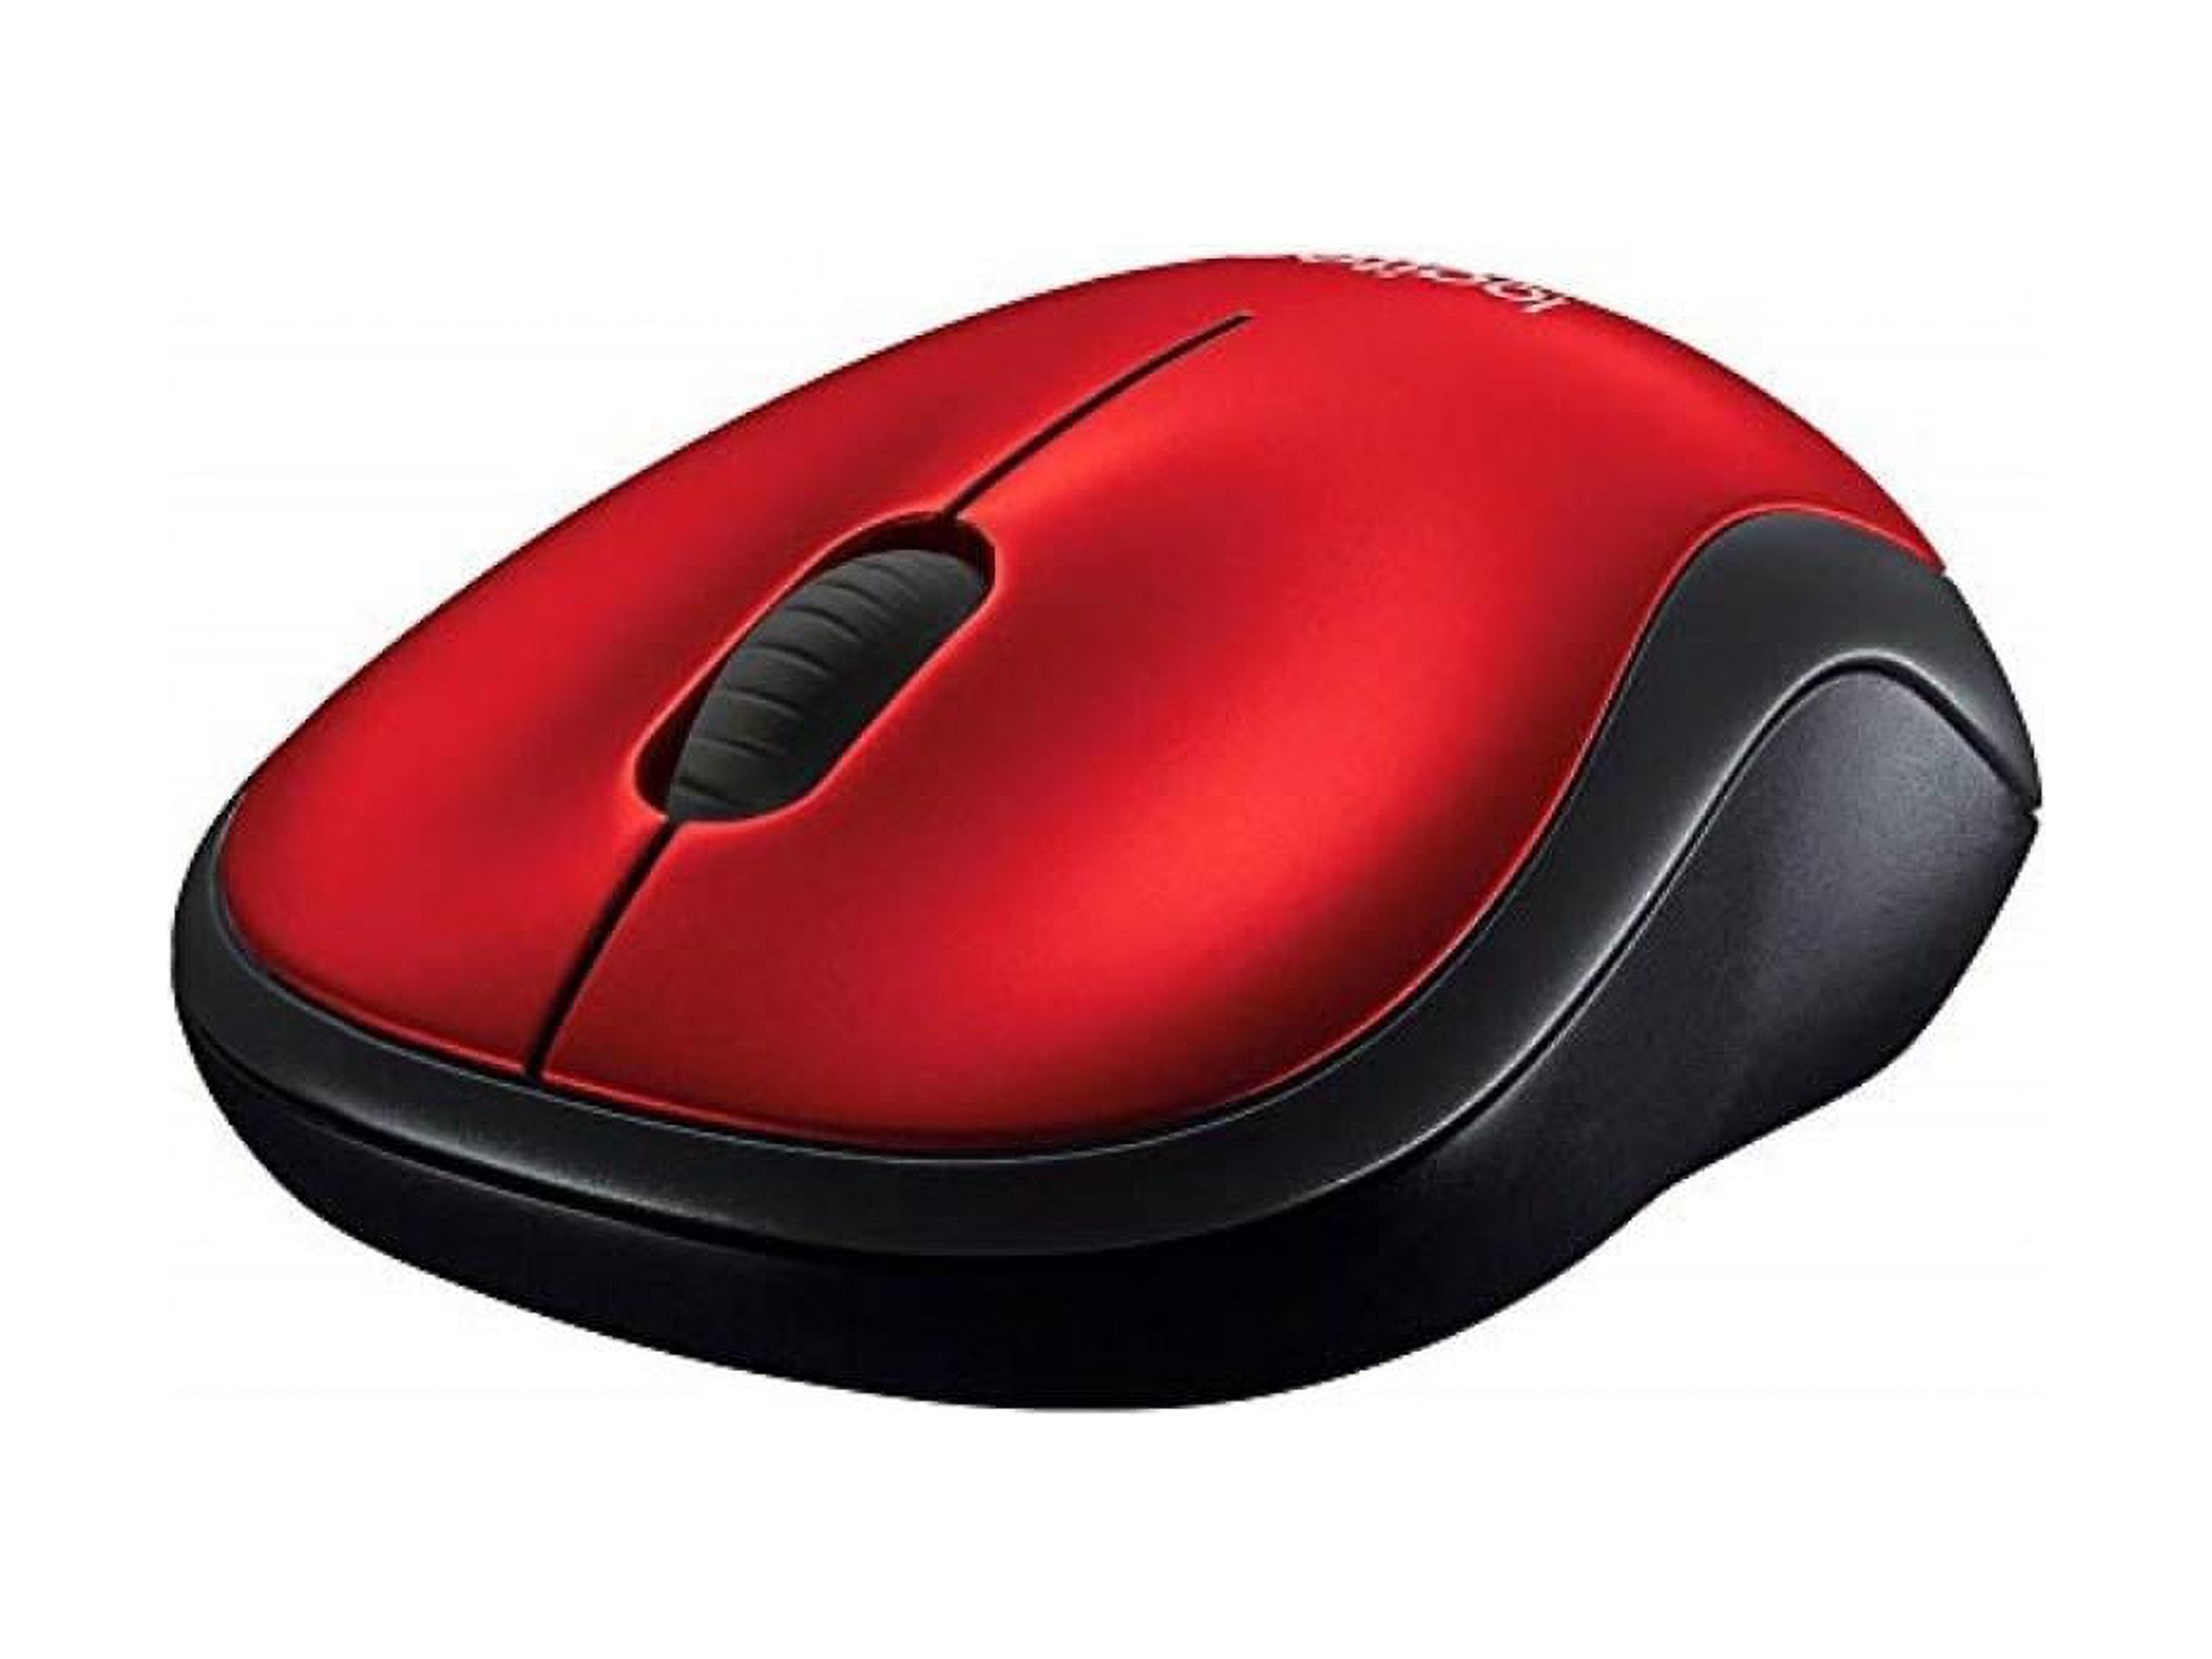 Logitech M185 Wireless Mouse, 2.4GHz with USB Mini Receiver, Ambidextrous, Red - image 5 of 15